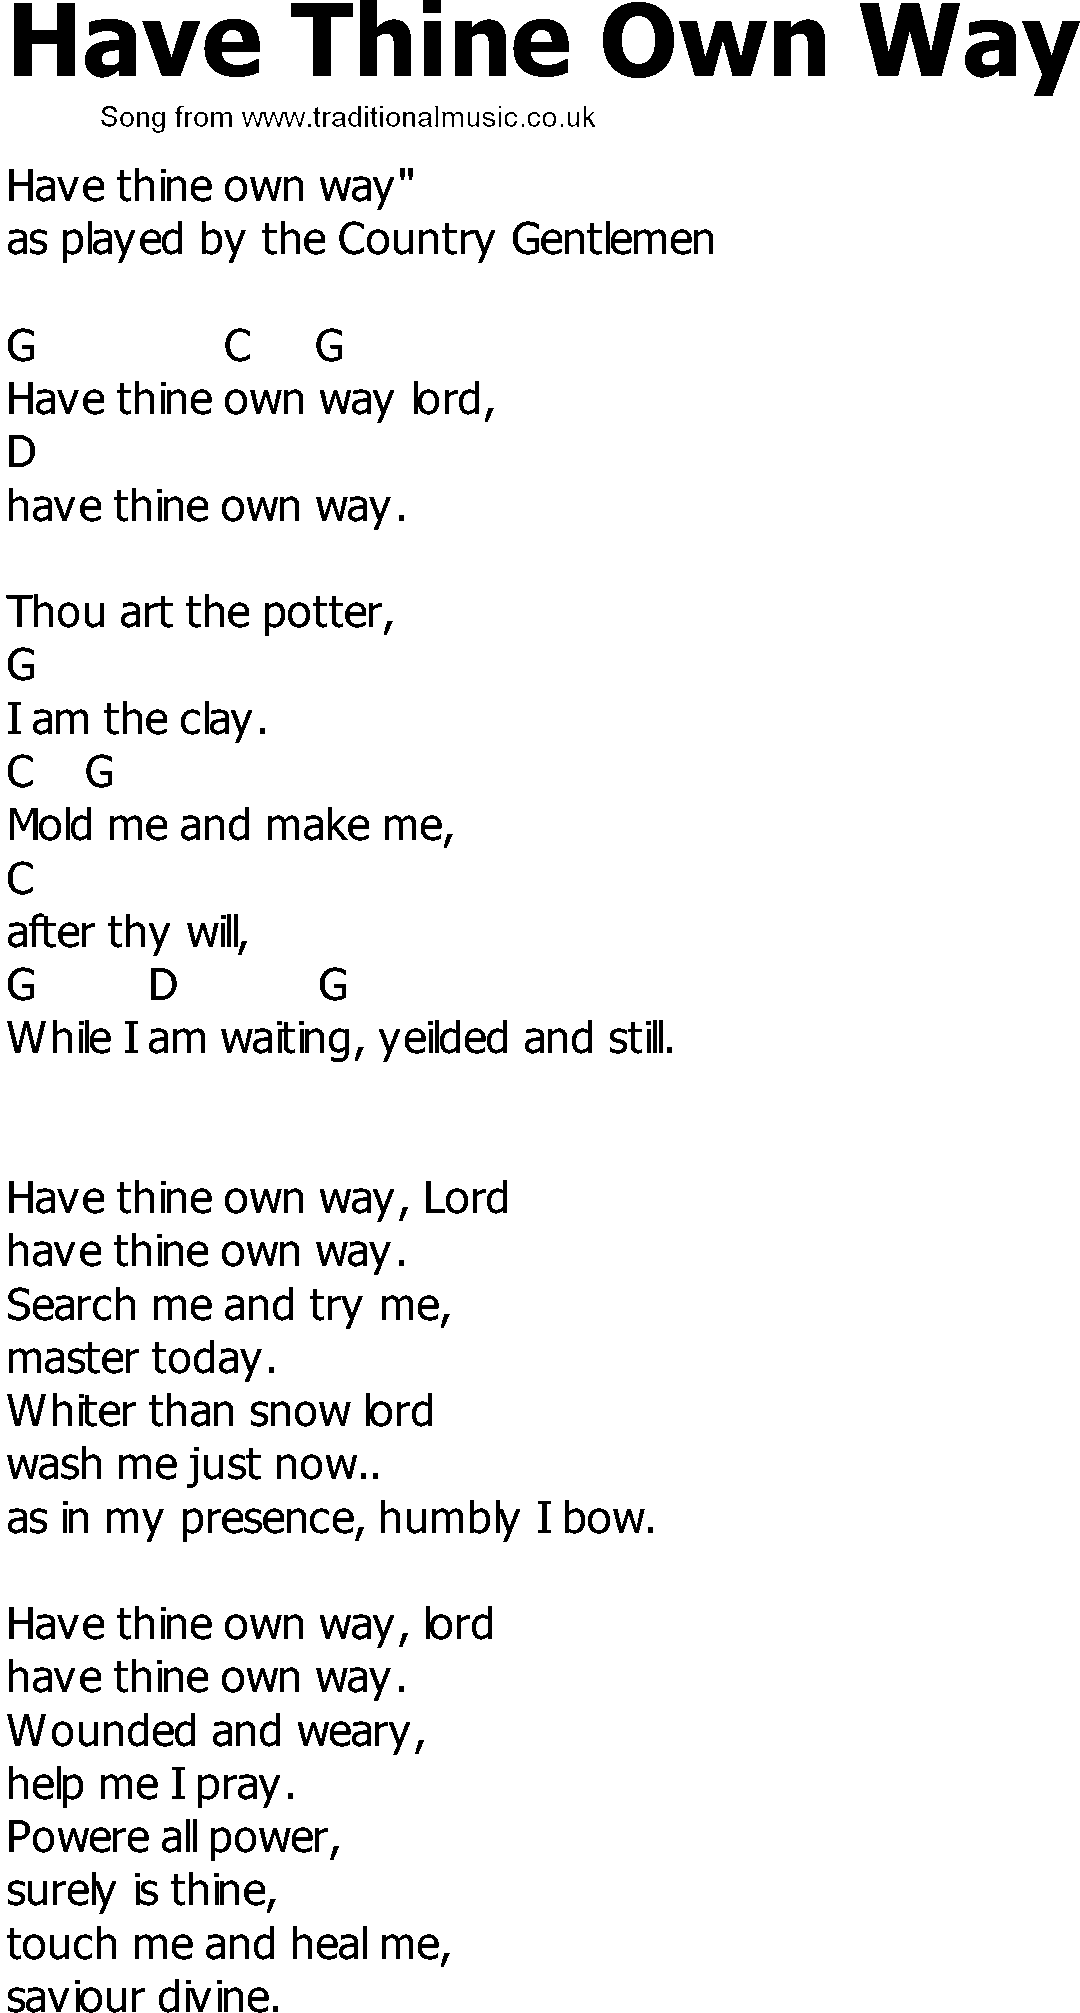 Old Country song lyrics with chords - Have Thine Own Way